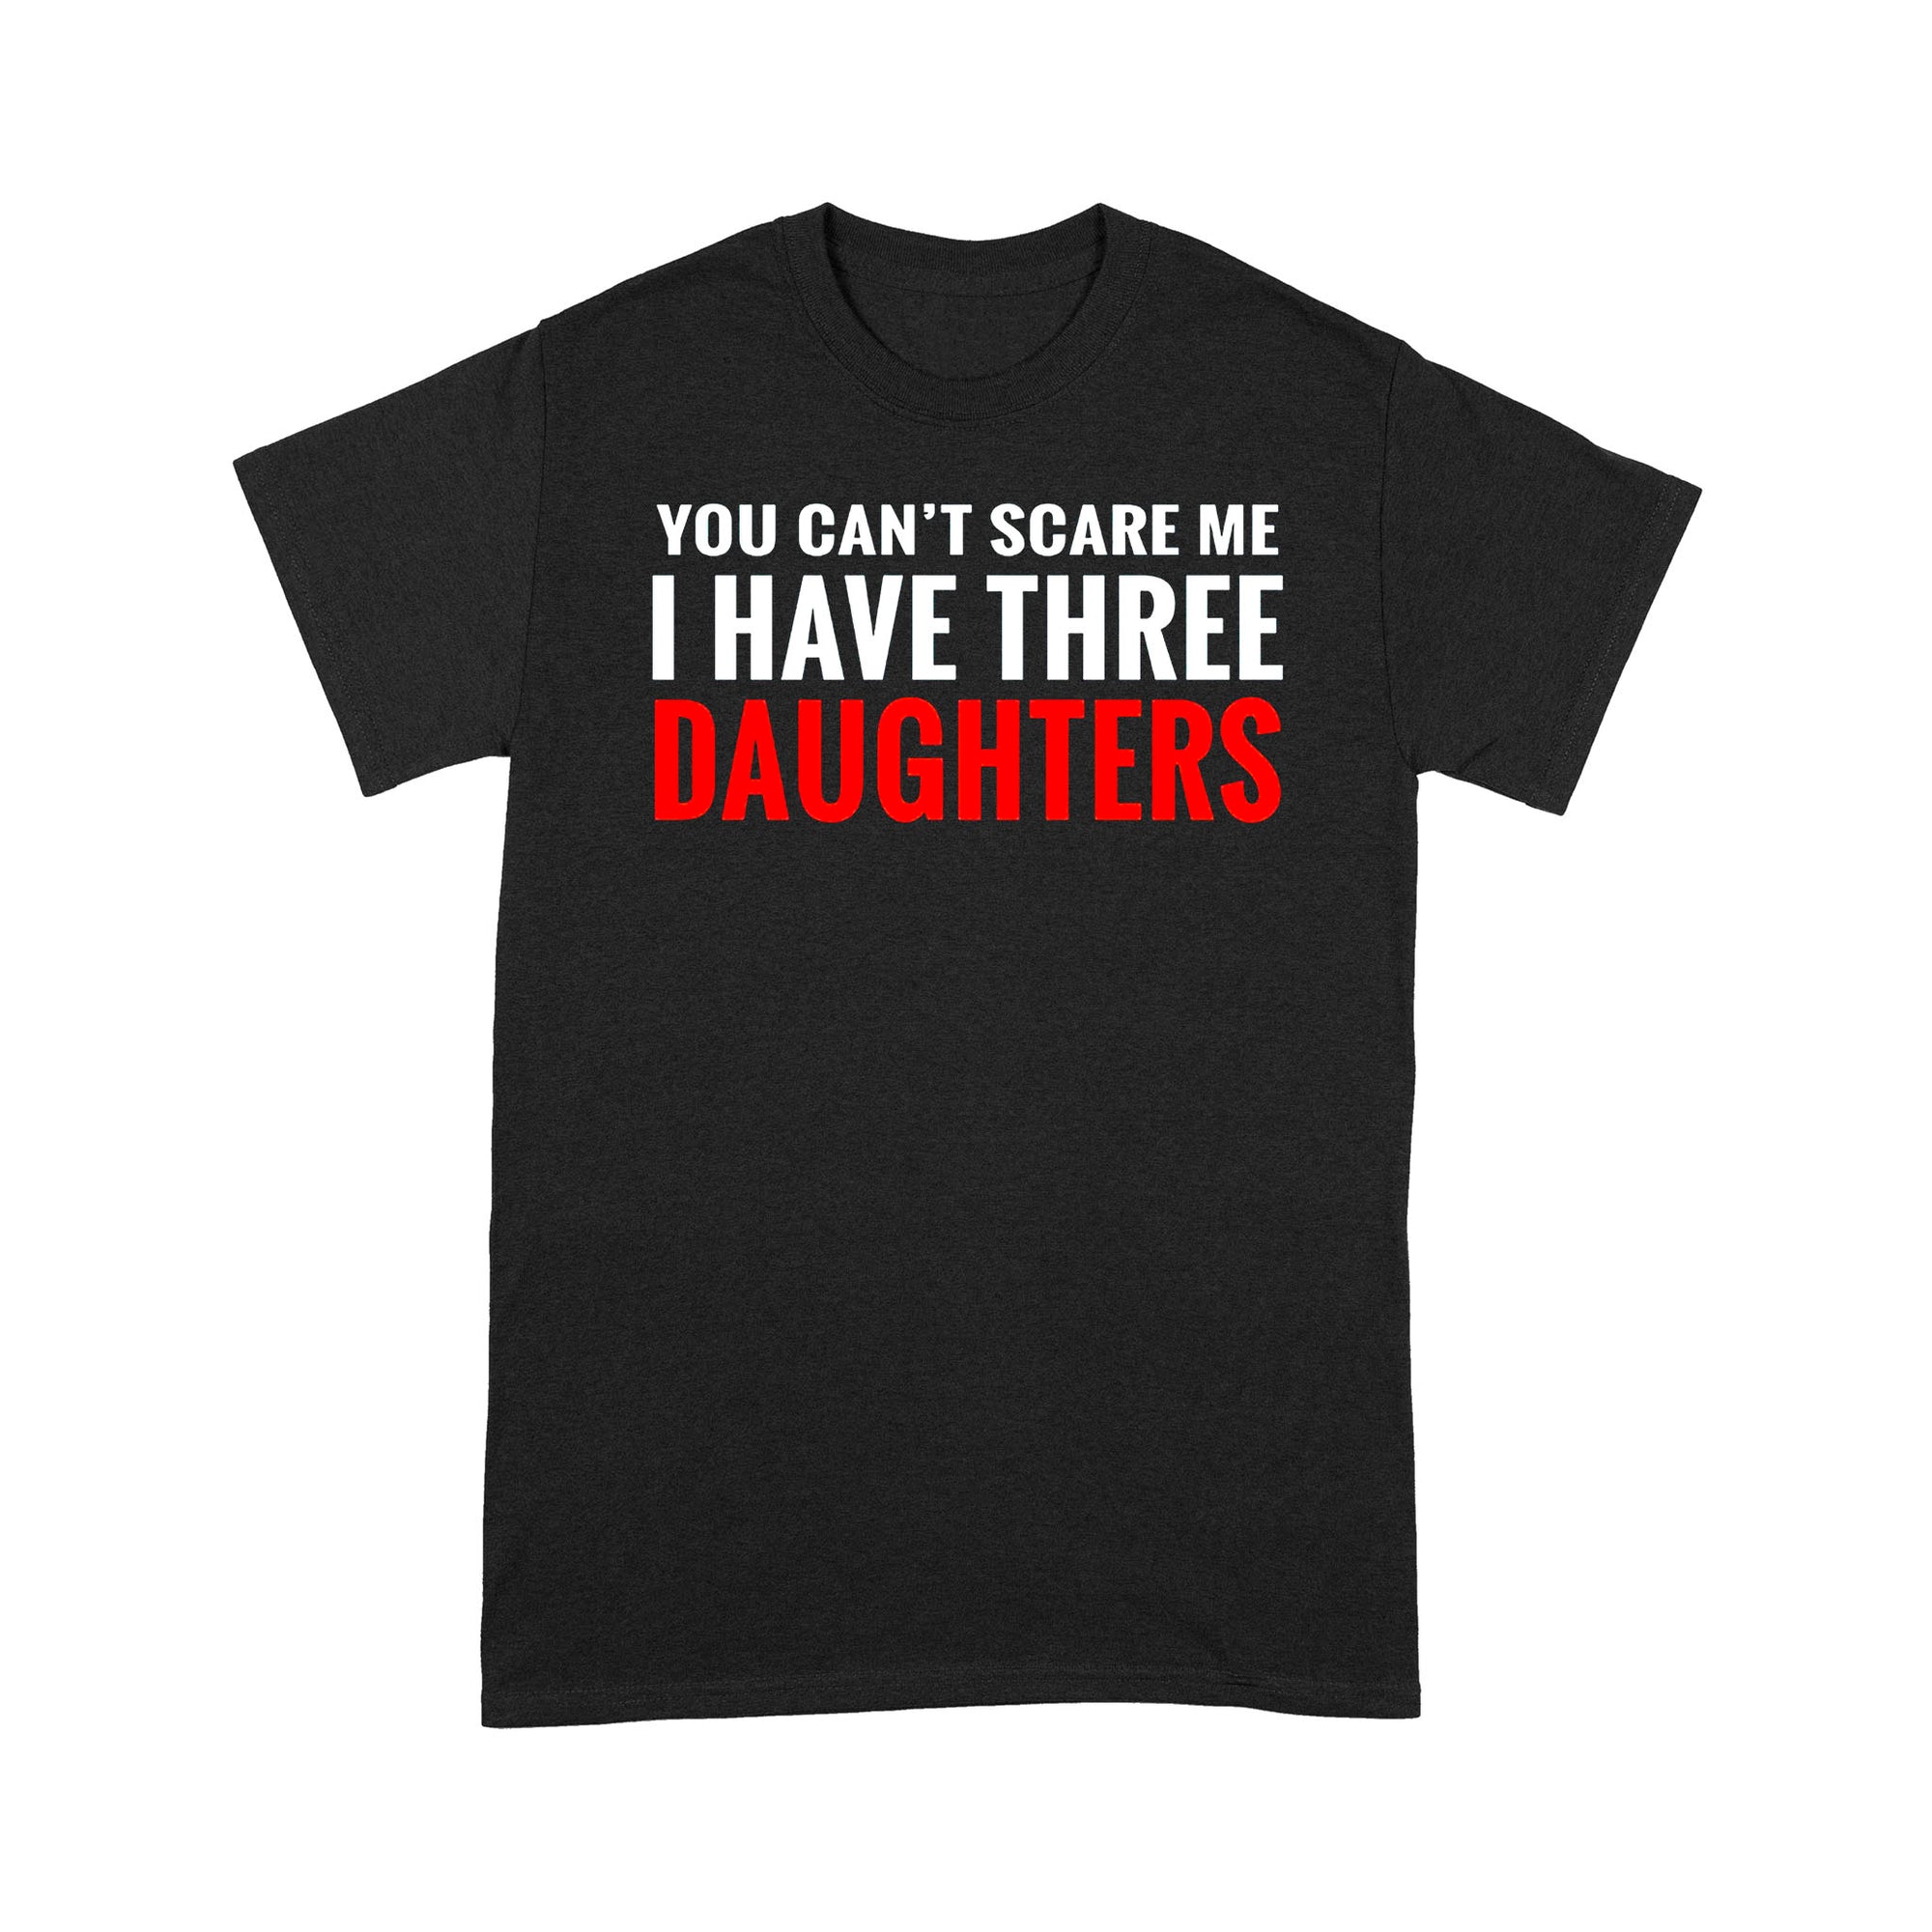 Gift Ideas for Dad You Can't Scare Me I Have Three Daughters - Standard T-shirt